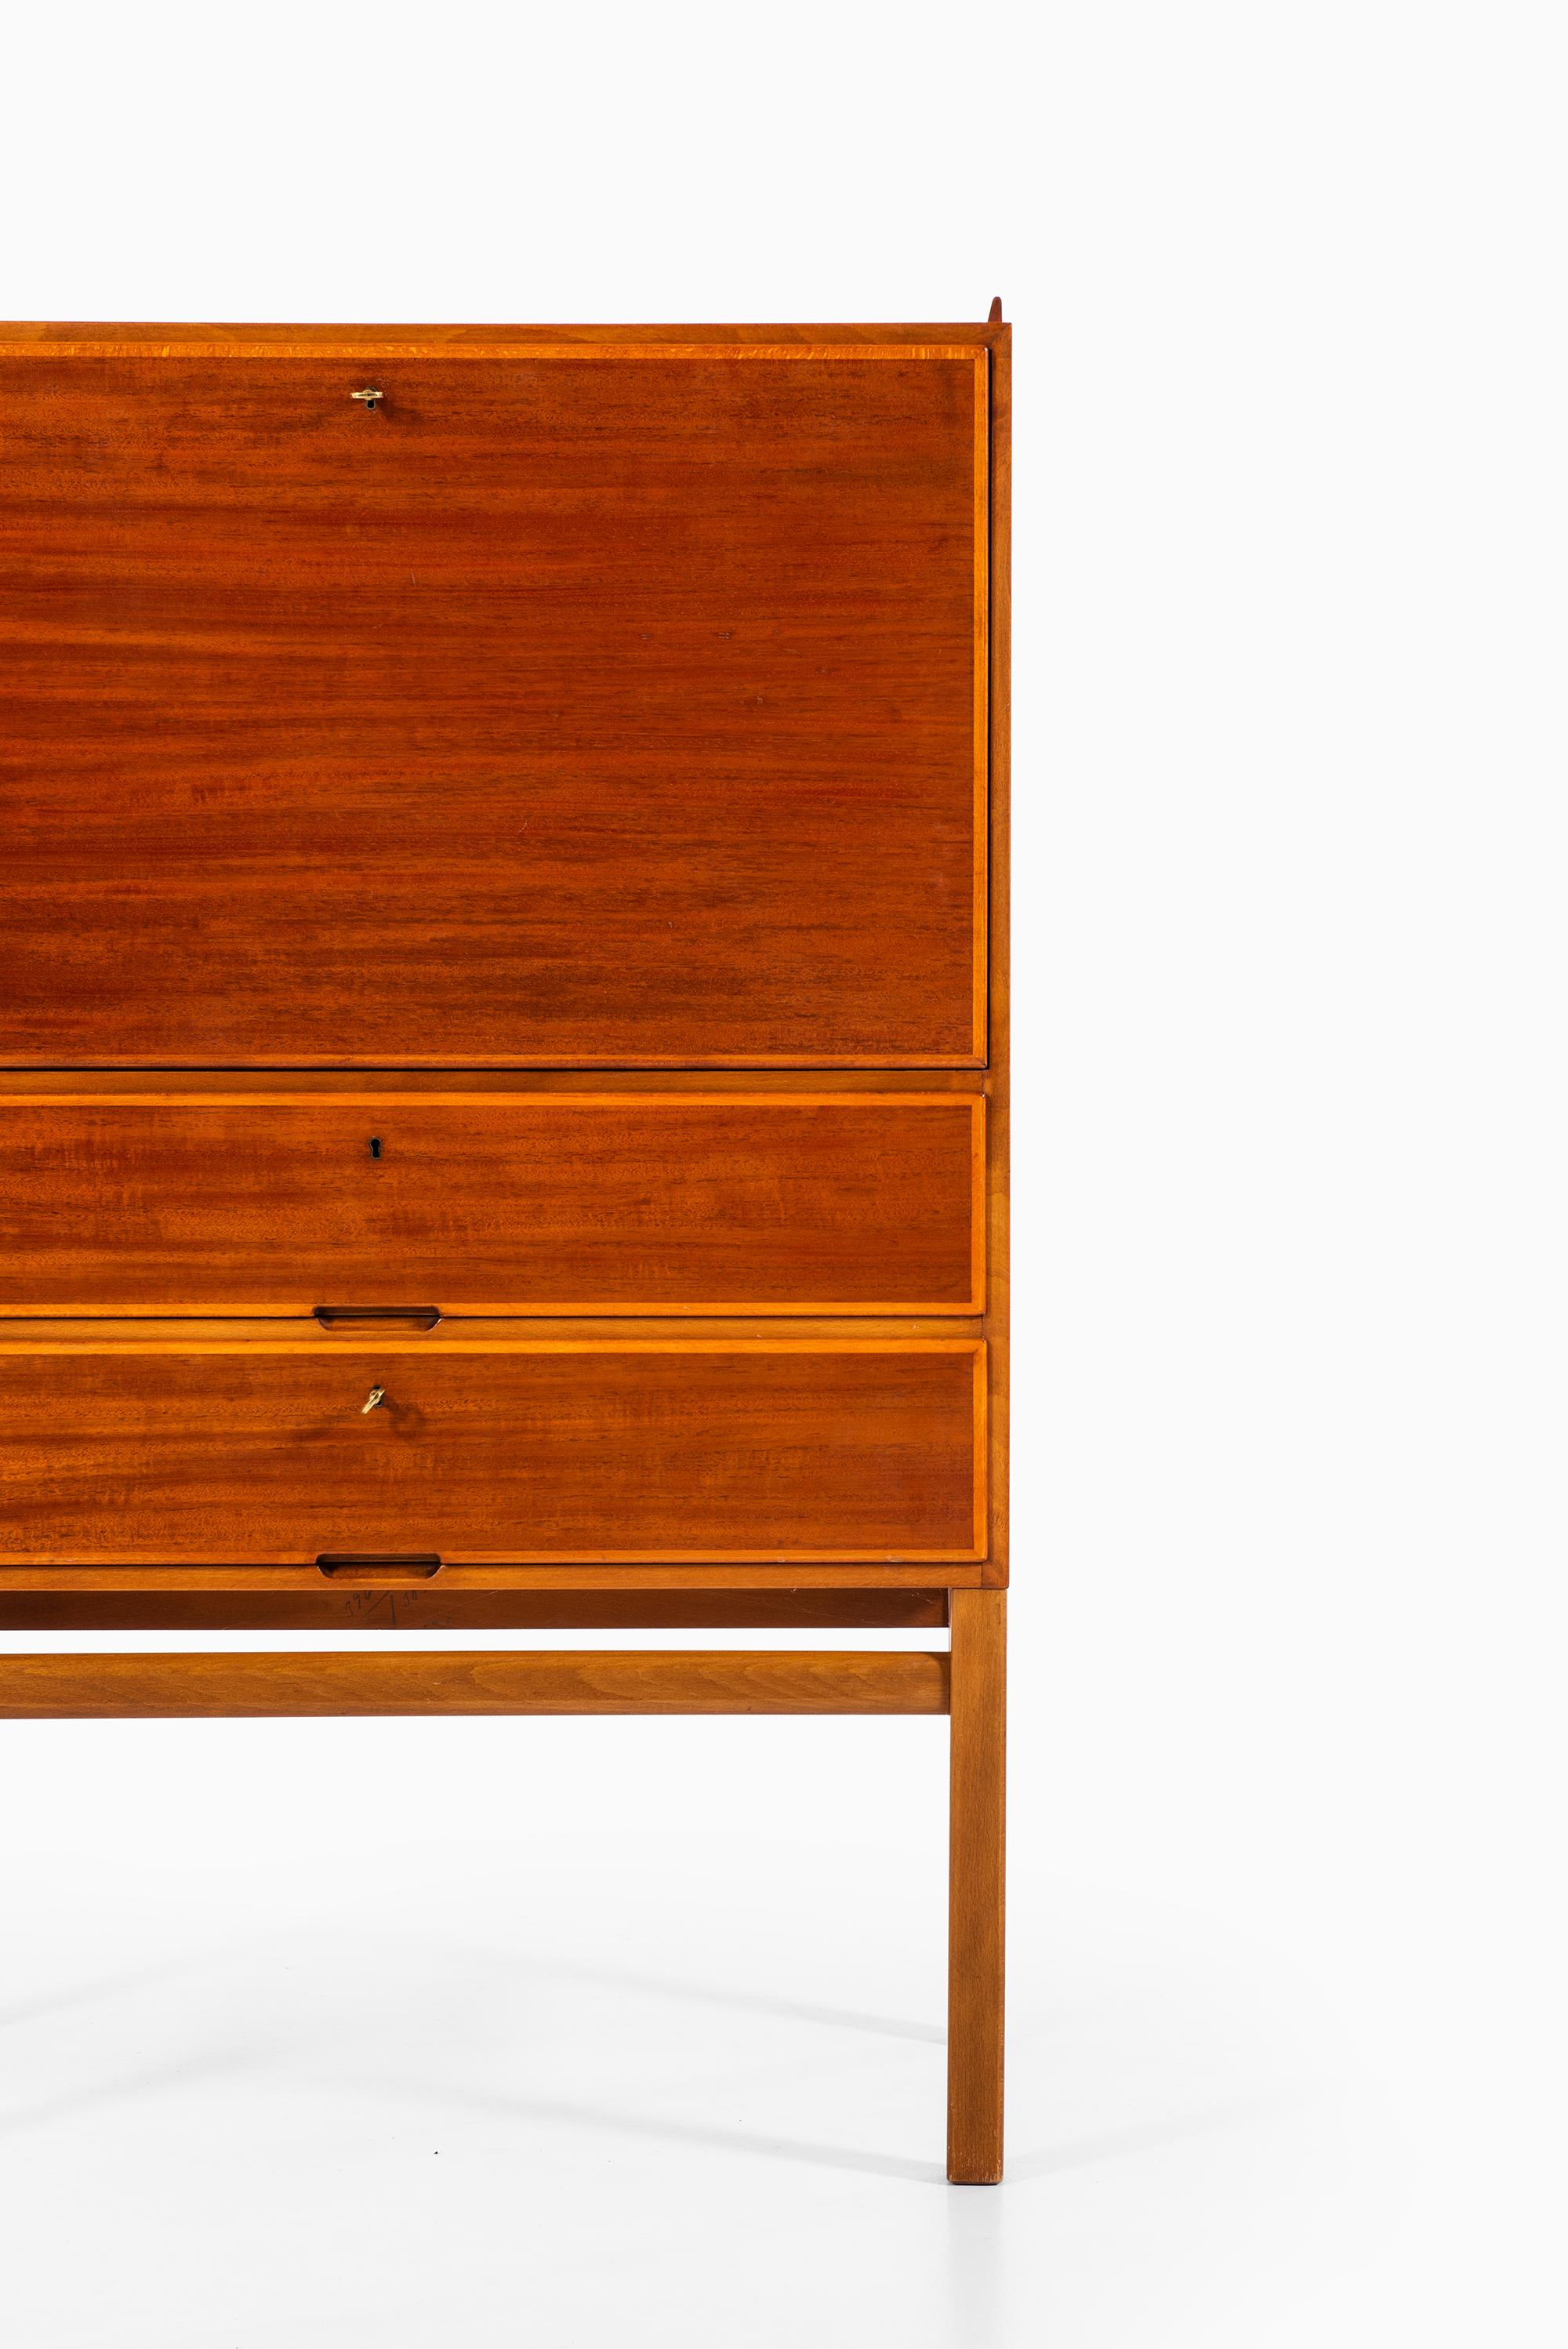 Rare cabinet with desk designed by Axel Larsson. Produced by Bodafors in Sweden.